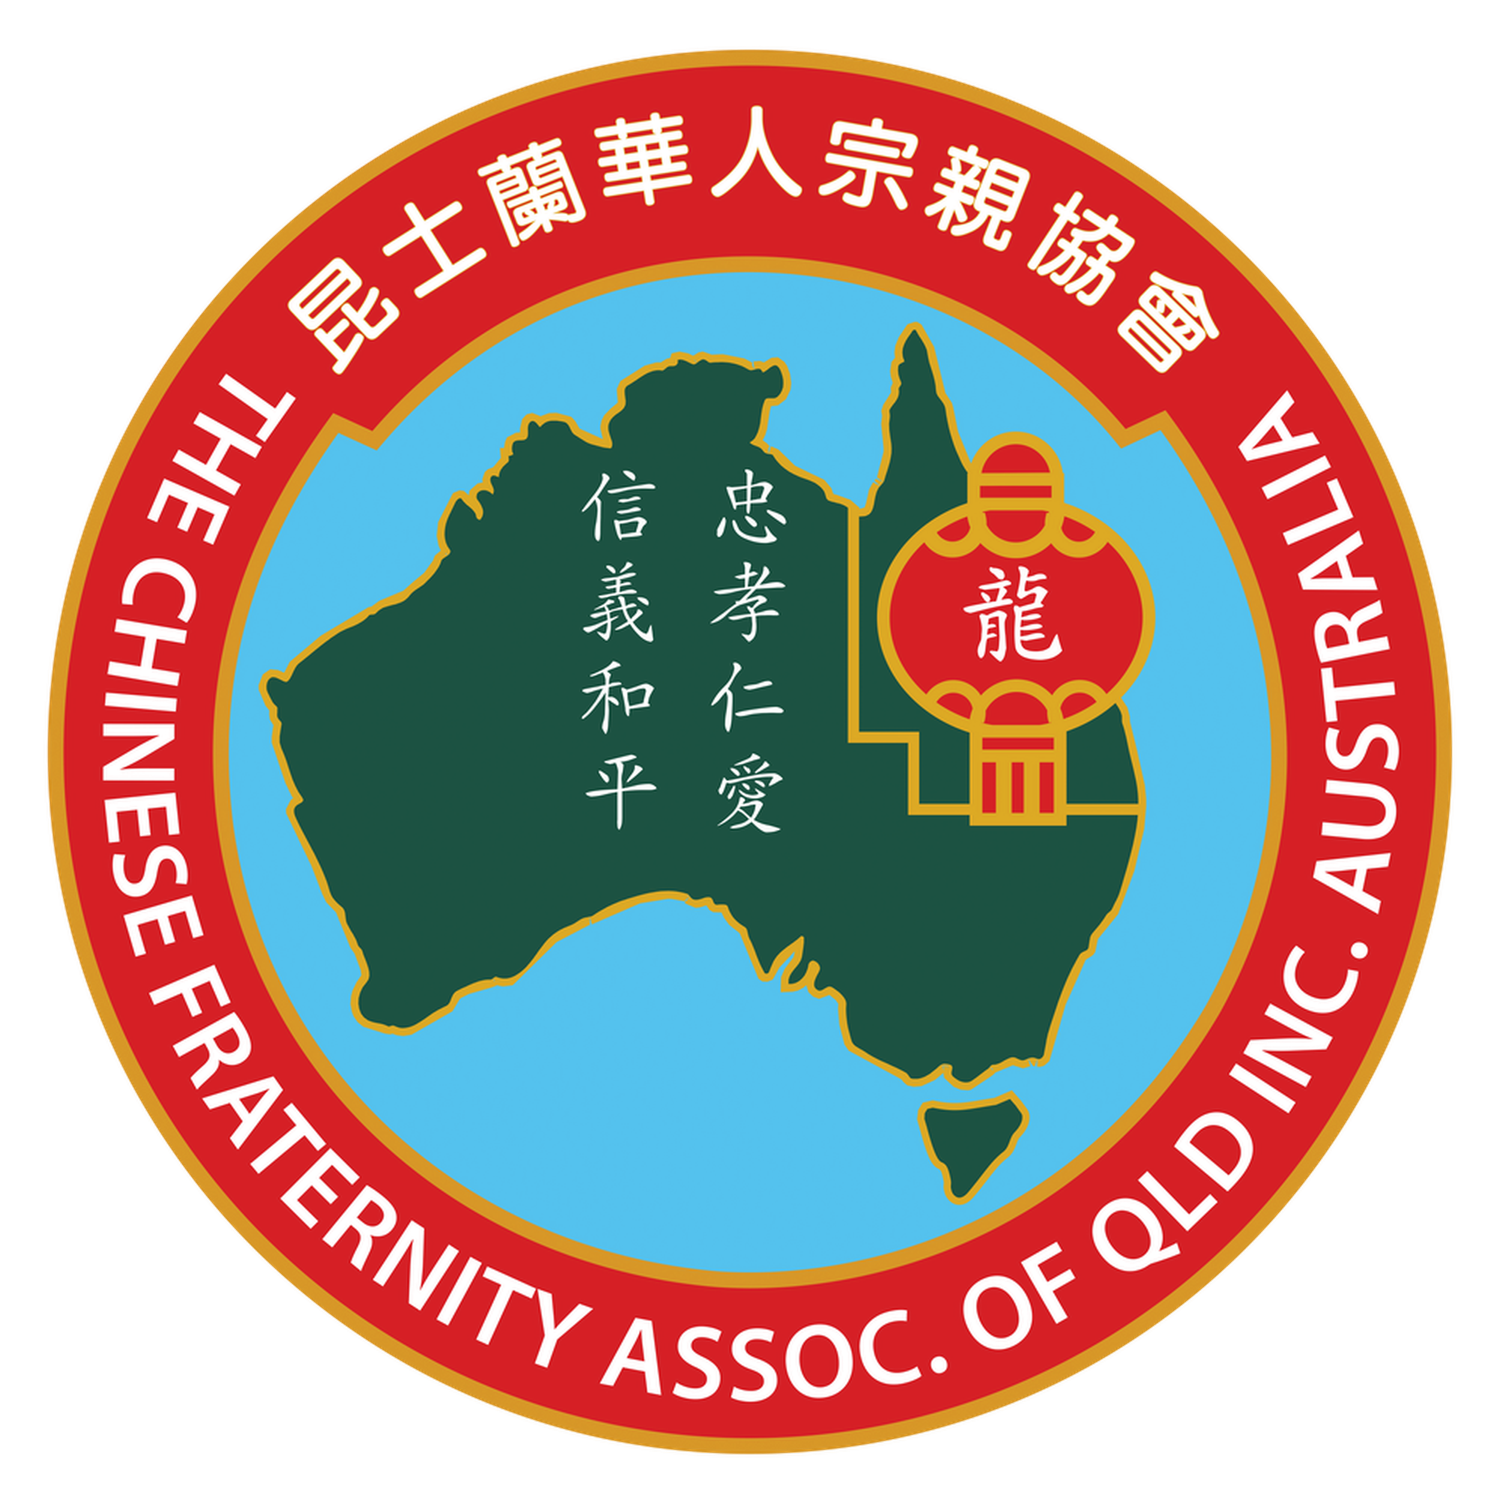 The Chinese Fraternity Association of Queensland